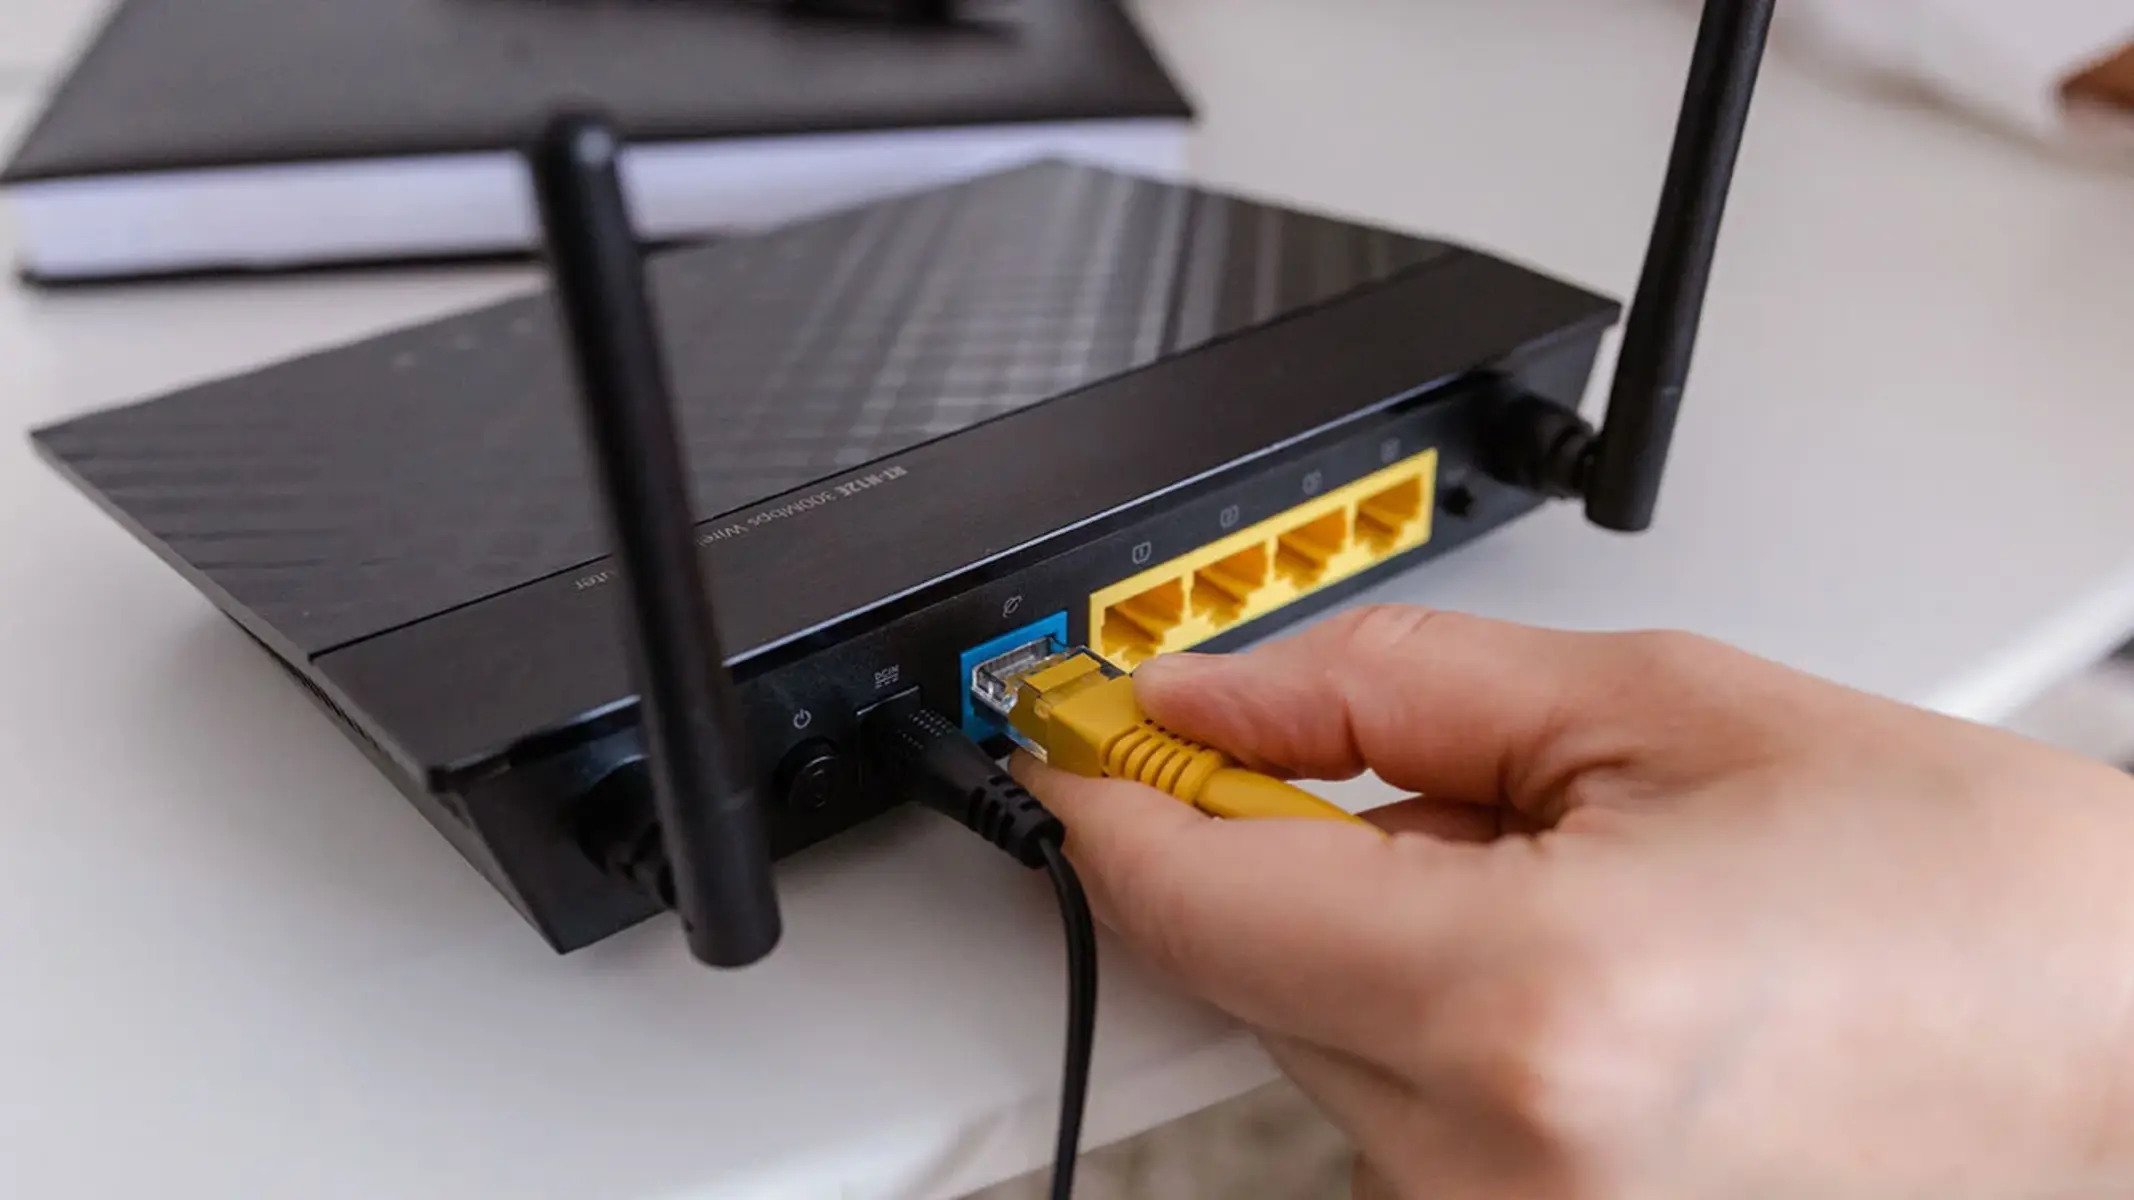 connecting-hotspot-to-router-step-by-step-guide